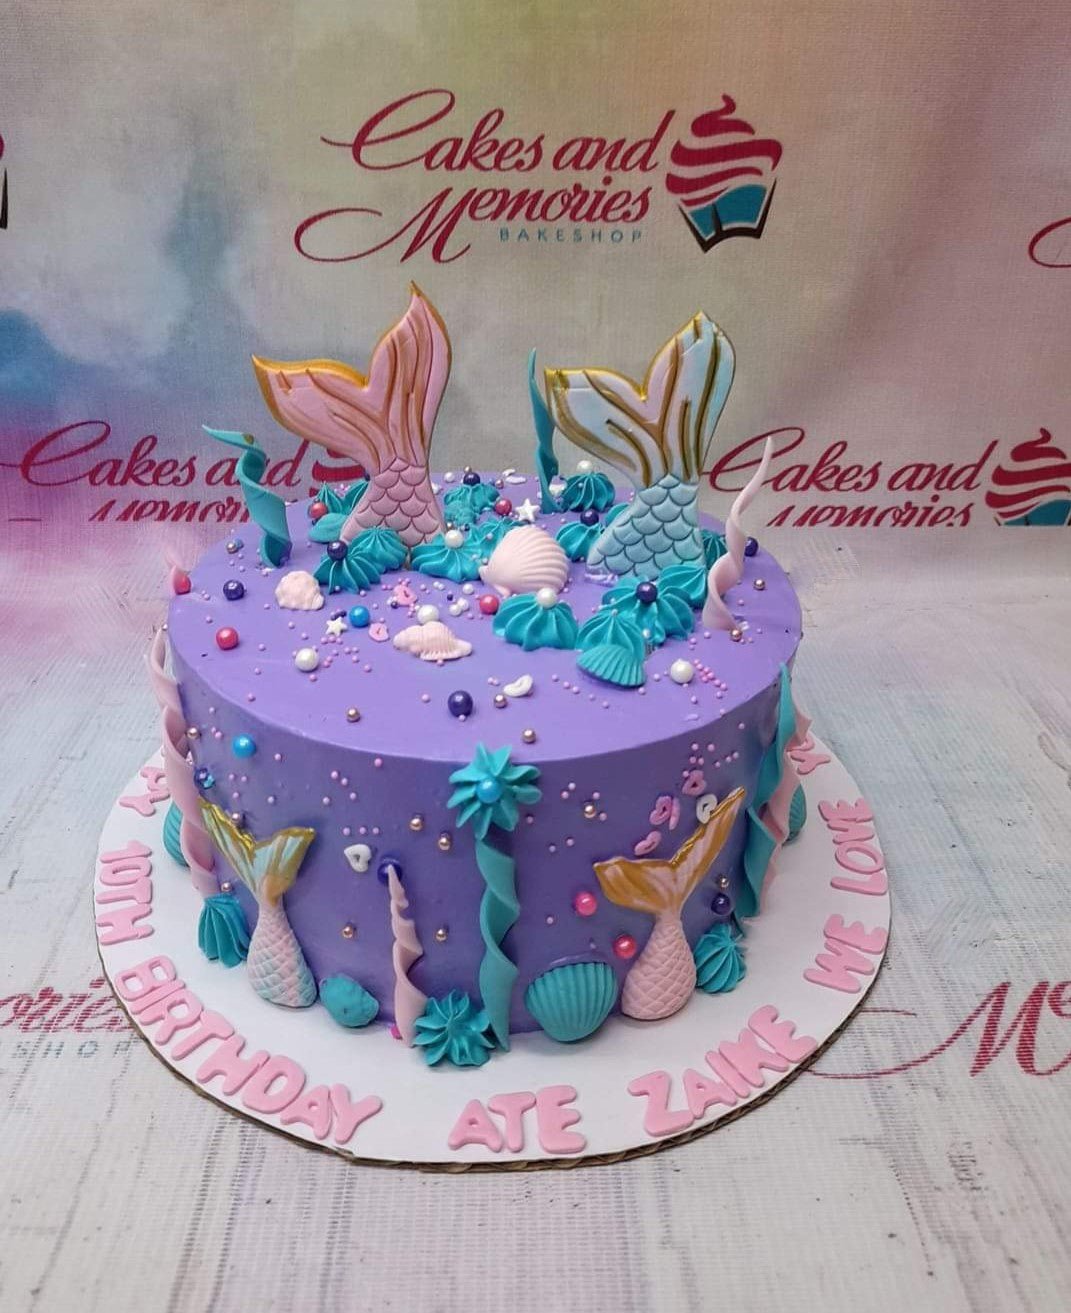 20+ AMAZING Mermaid Birthday Cakes You Should See! | Mermaid birthday cakes,  Mermaid cakes, Amazing cakes